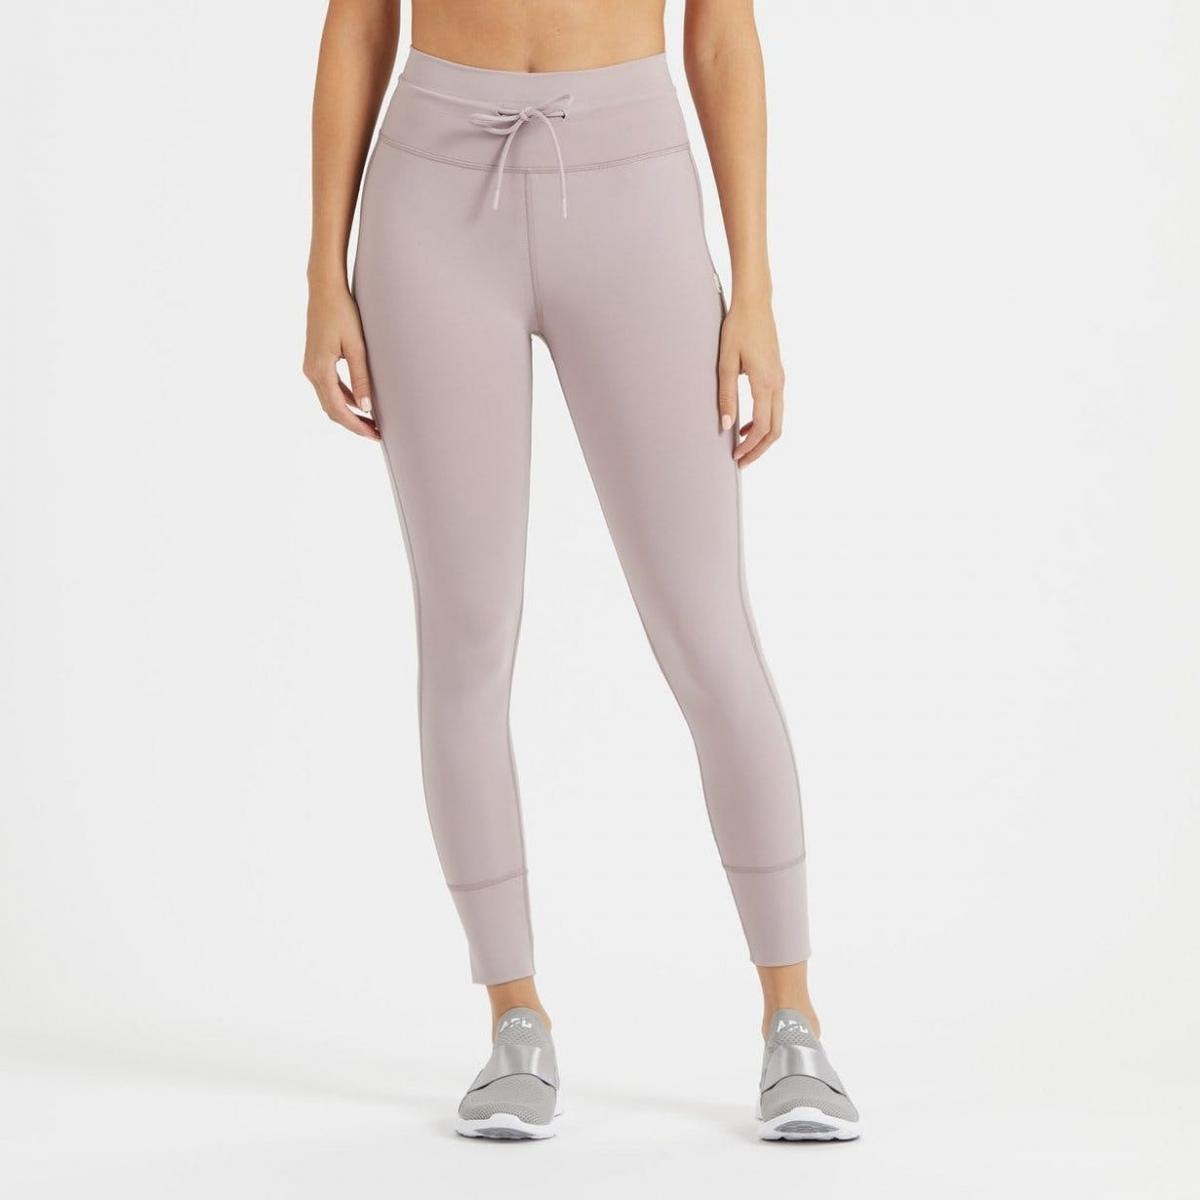 Vuori Clothing Review… The Daily leggings and the real star ⭐️ of the